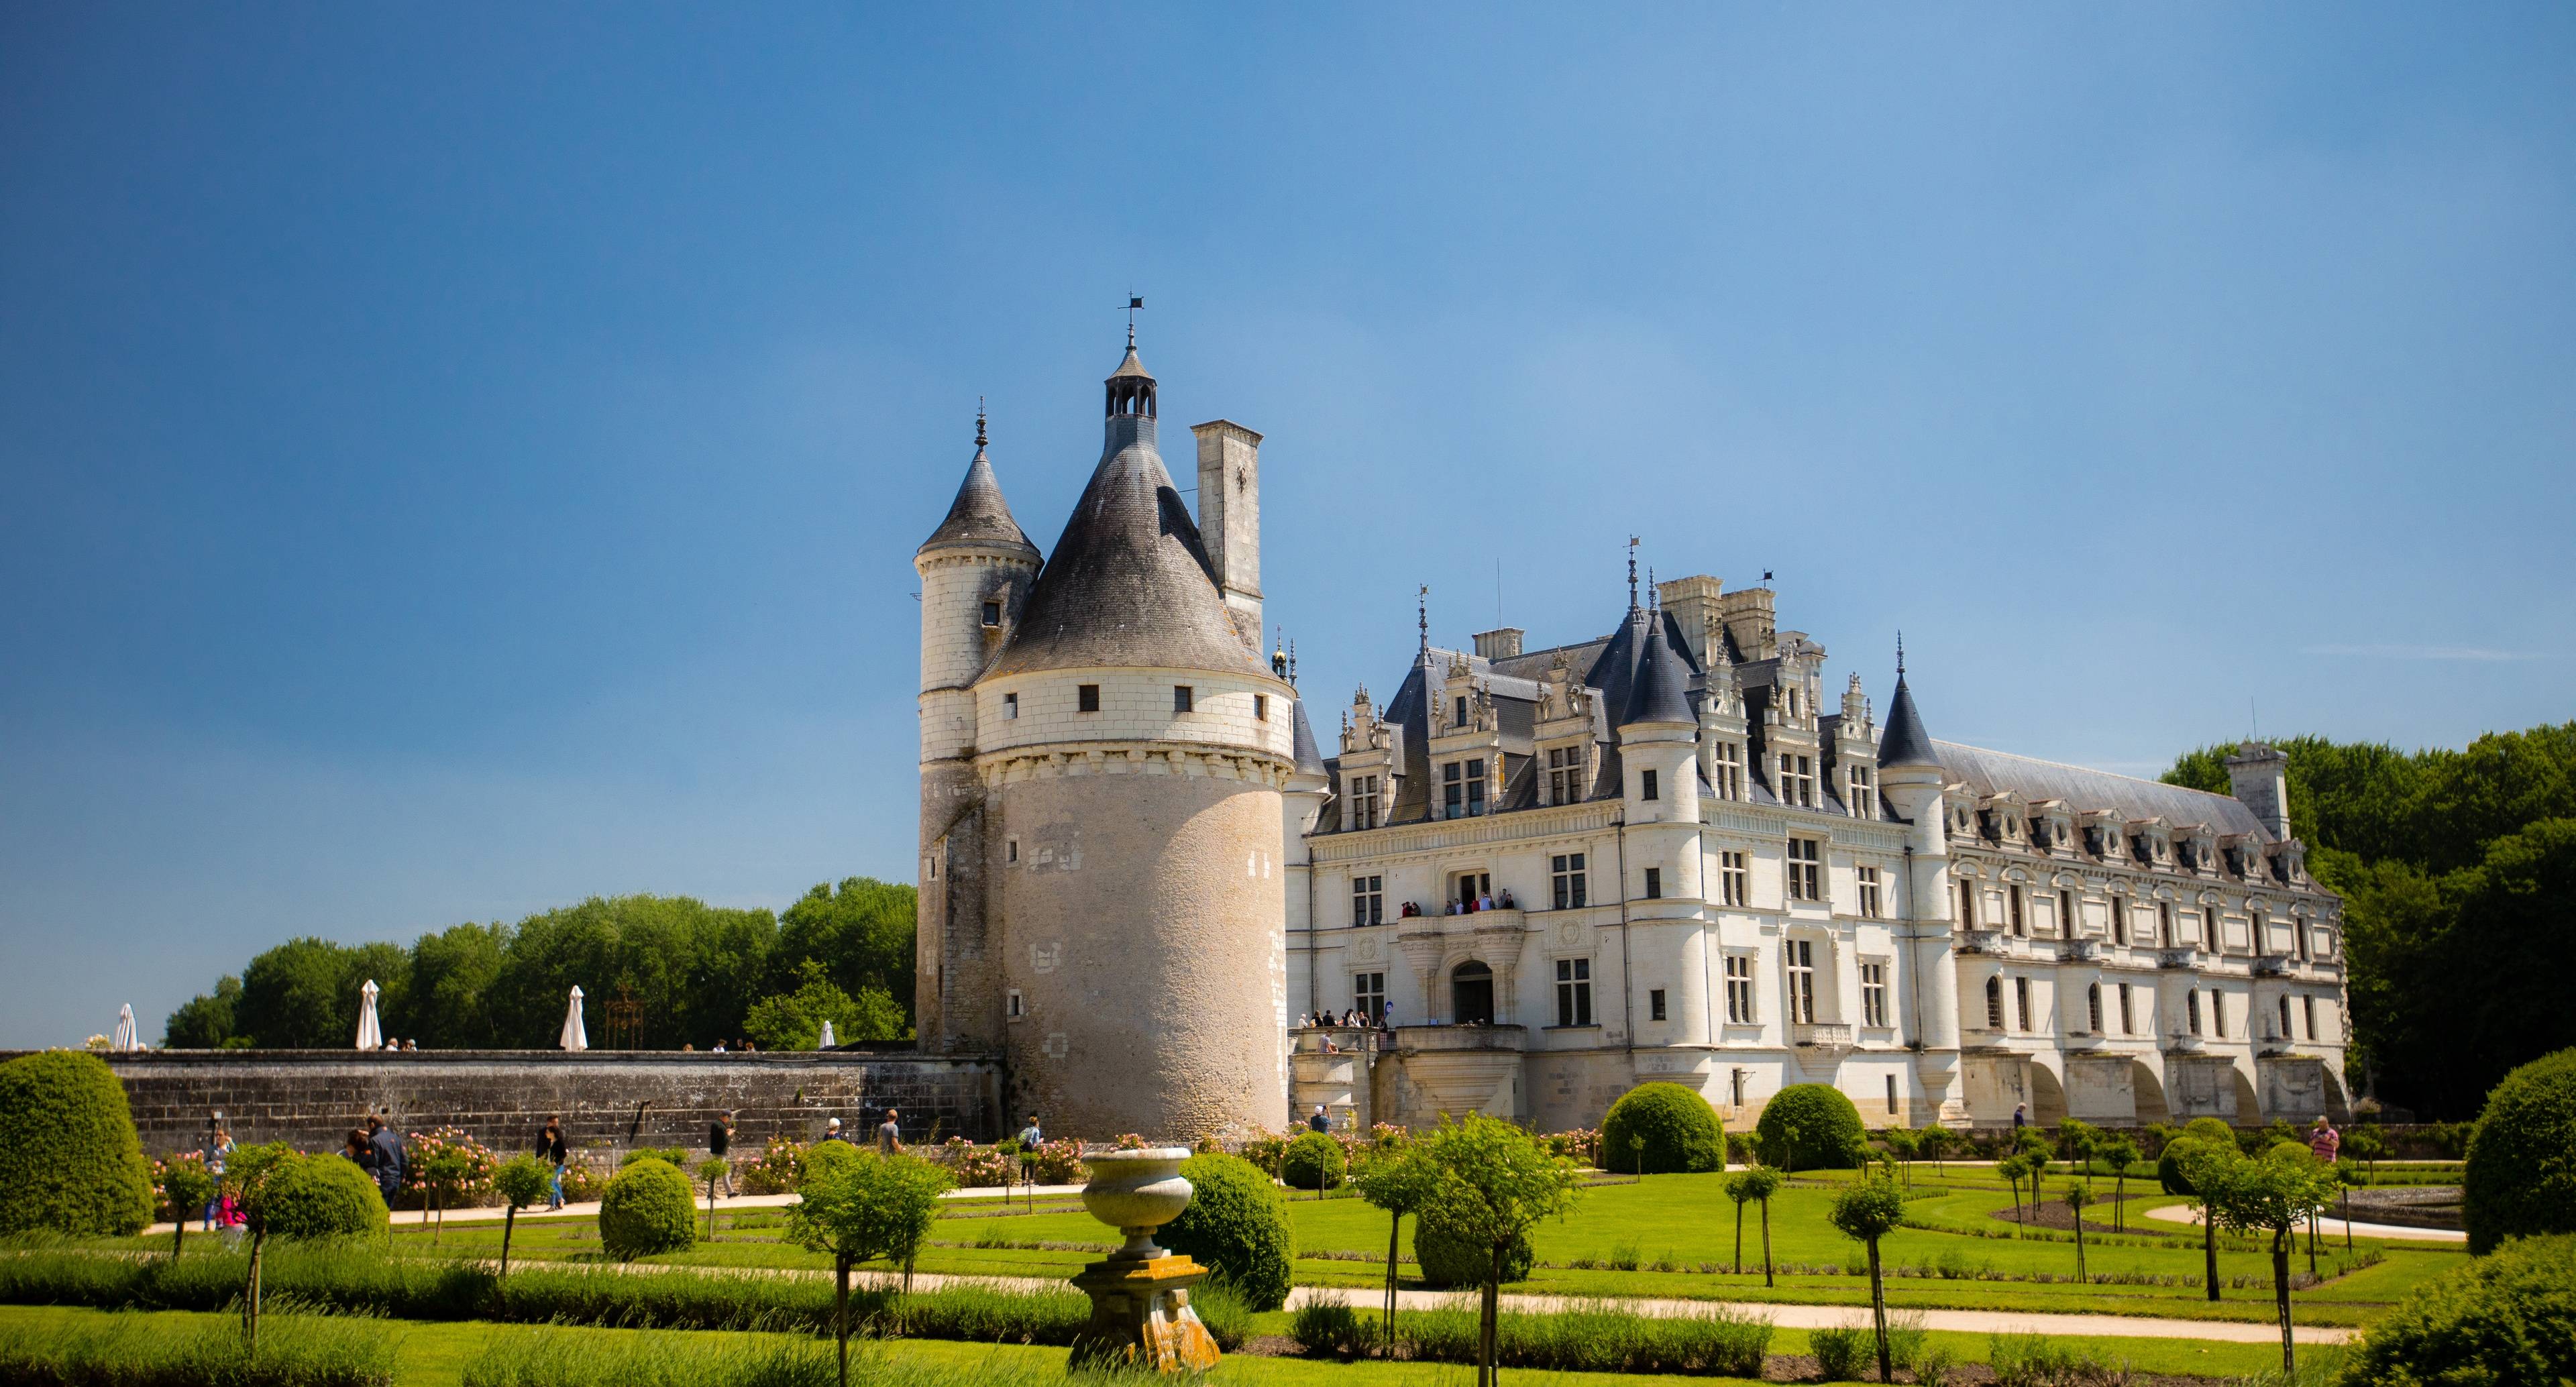 Fall in Love in Front of the Castles of the Loire